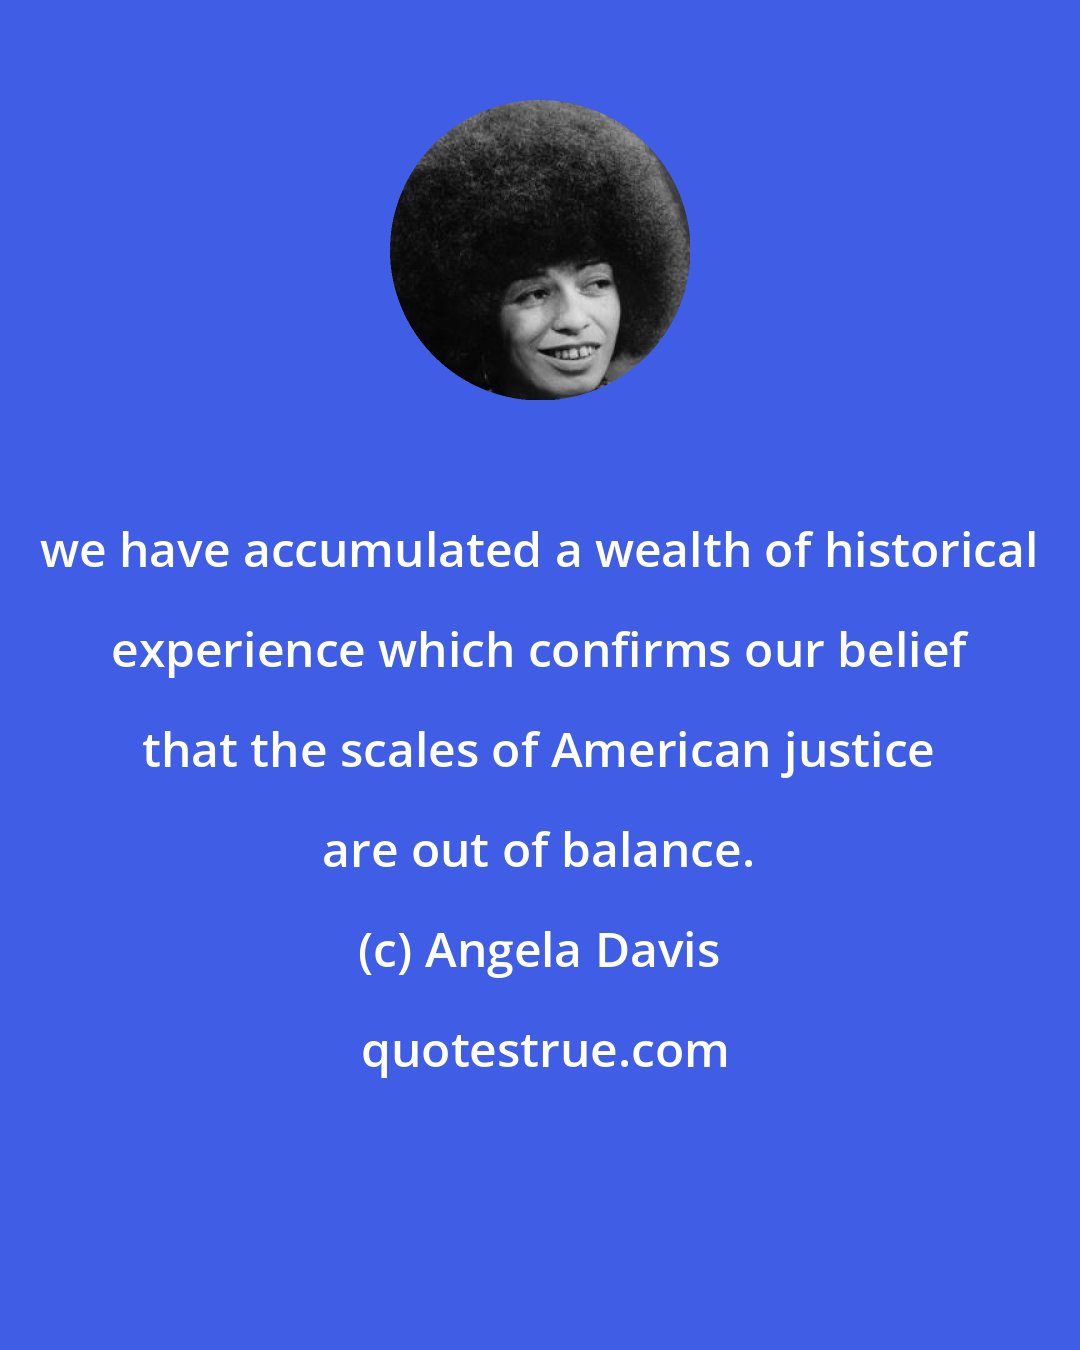 Angela Davis: we have accumulated a wealth of historical experience which confirms our belief that the scales of American justice are out of balance.